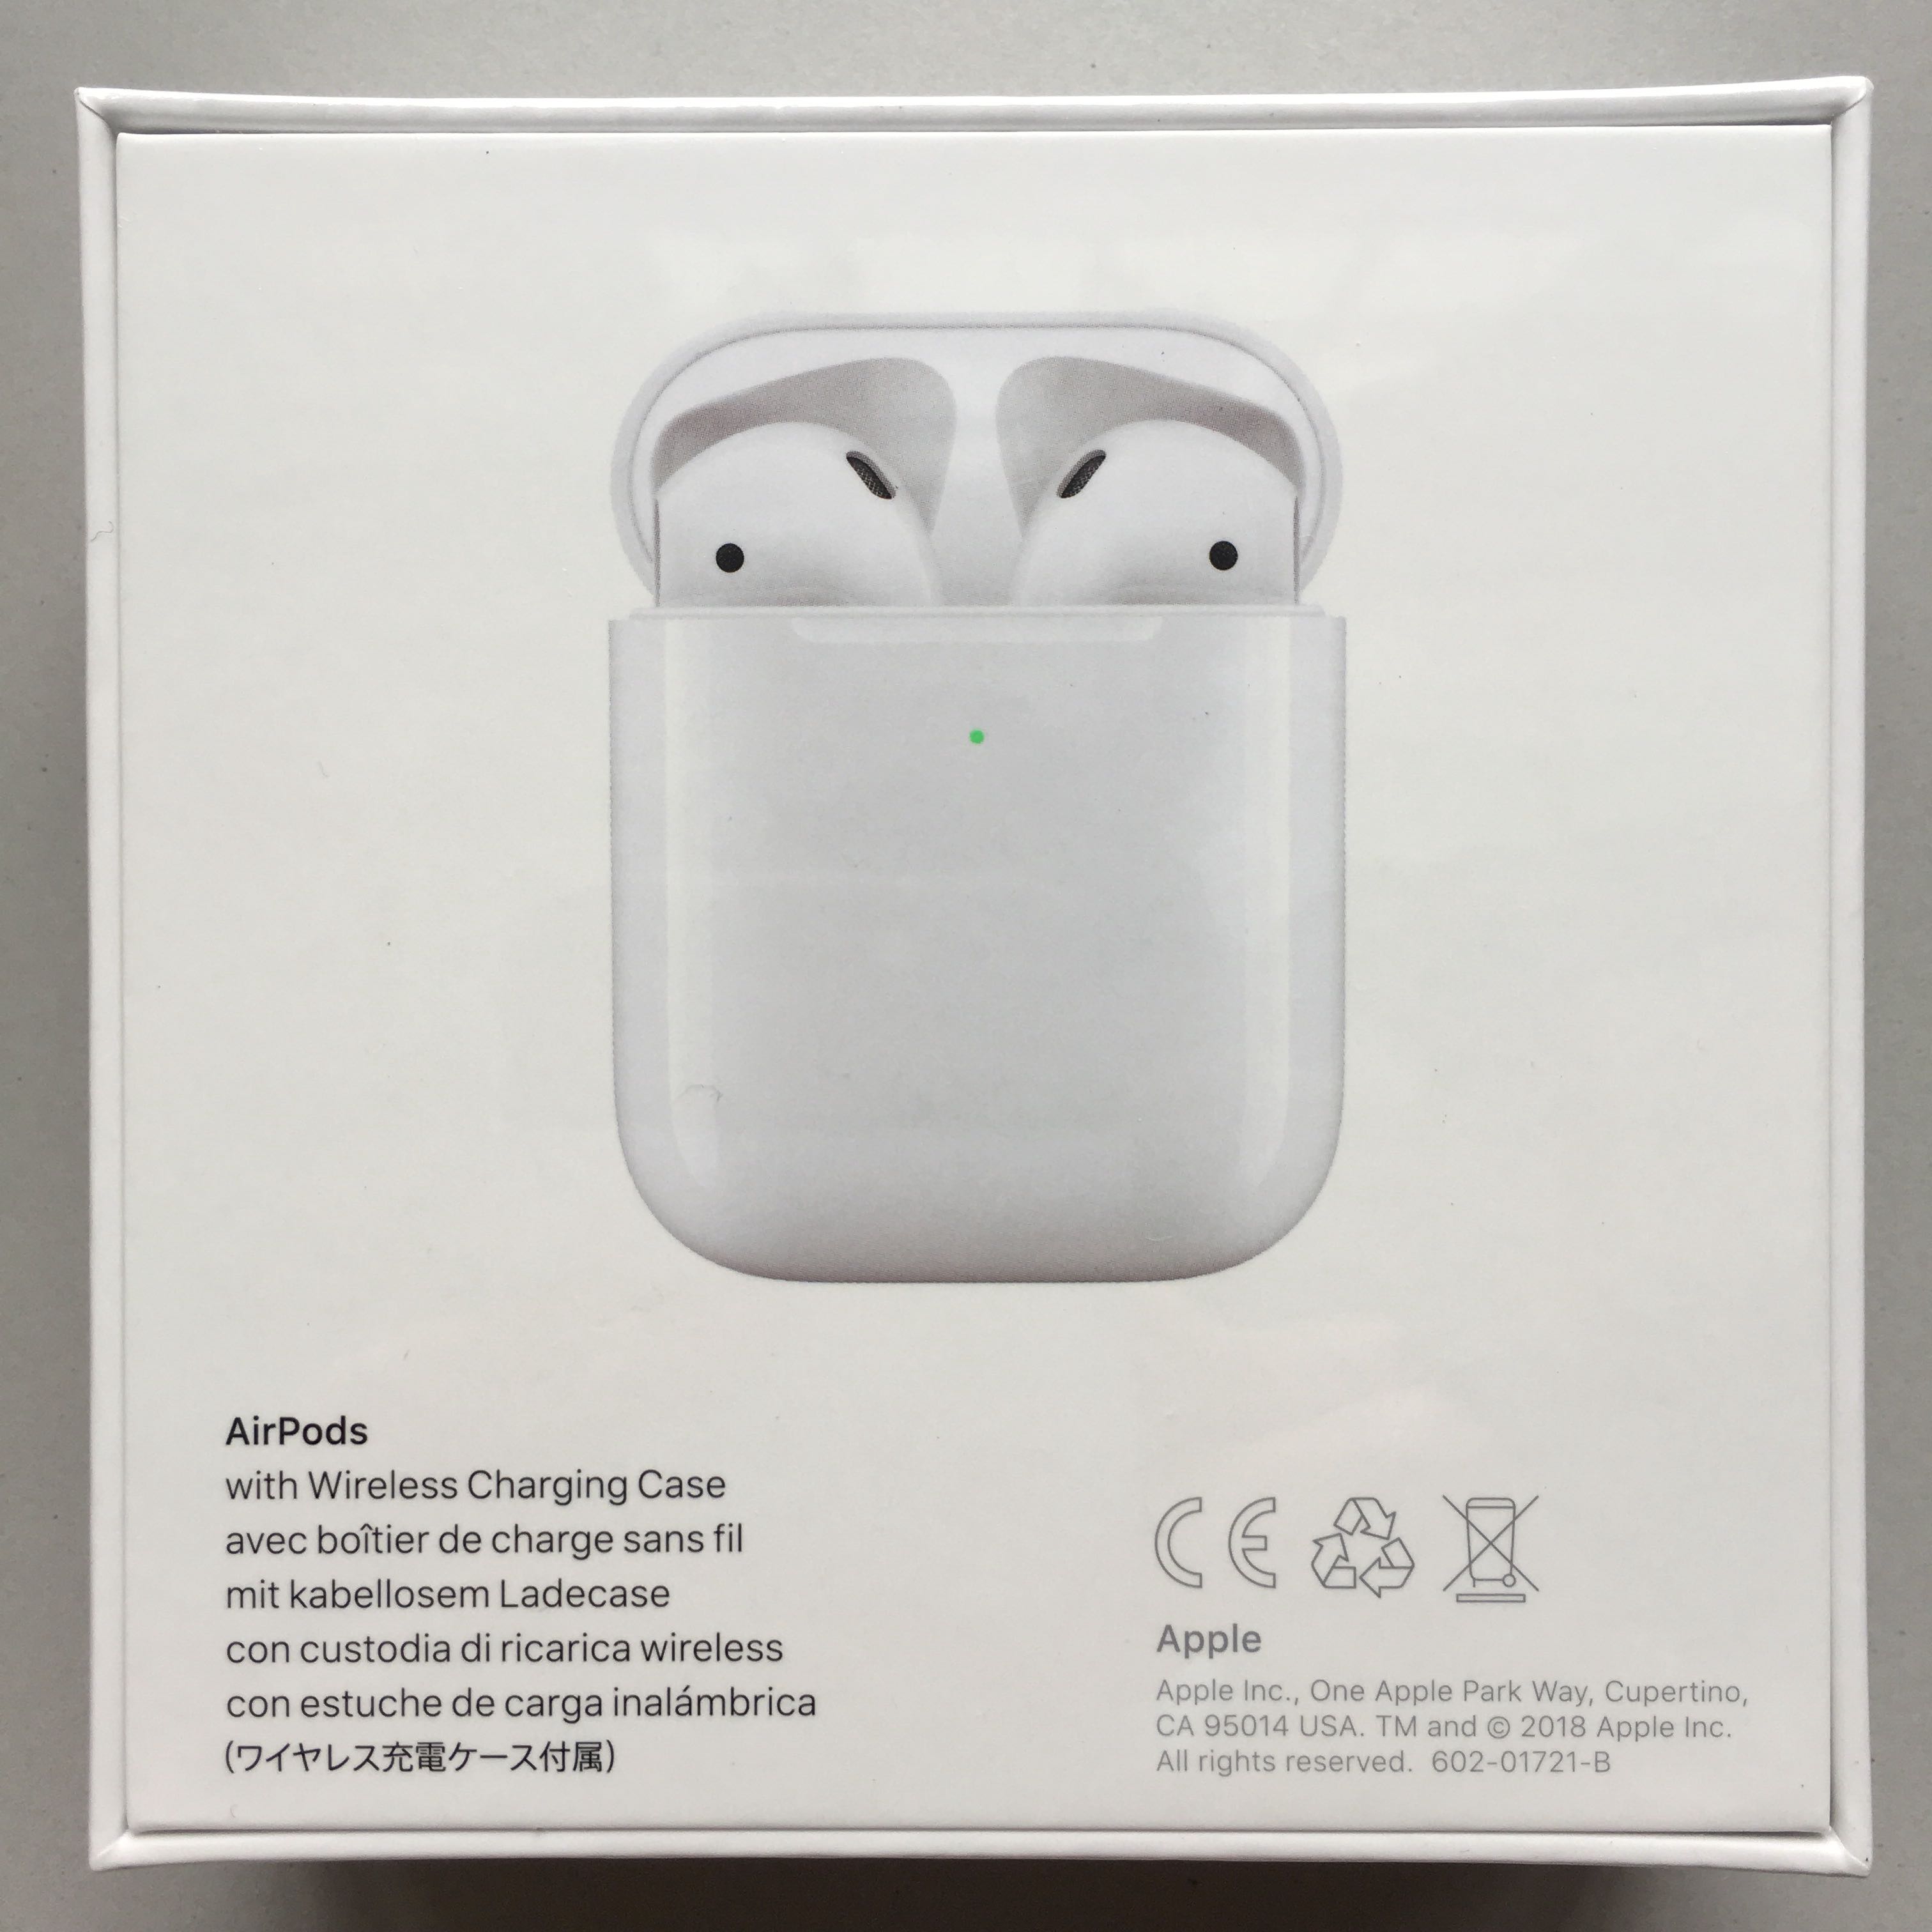 Apple Airpods 2 Wireless Charging Case 2019 Version 2nd Second Generation Gen 2 1568208542 4e91bbcb 